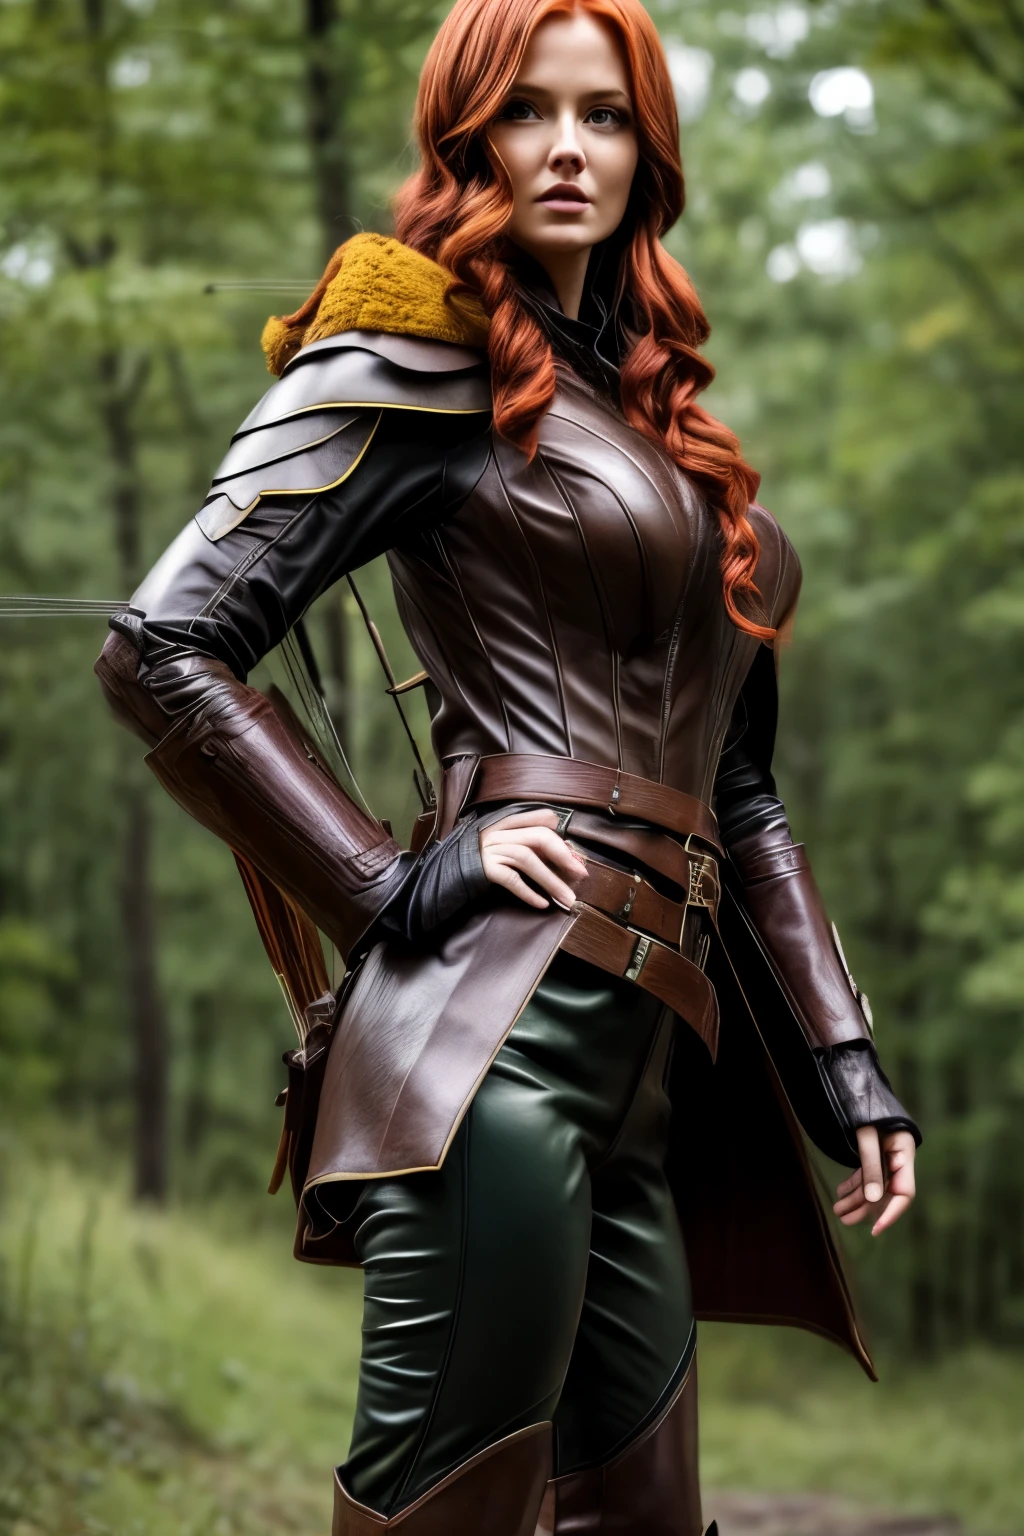 (photorealistic:1.1) 32 yo woman forest archer in a fantasy world, action shot, female protagonist, very tall woman, wearing knee-high lightweight brown leather boots, wearing brown animal leather pants, wearing green and yellow Ranger cloak, wearing a Oakleaf necklace, wearing green breeches beneath her cloak, hoody put down from her cloak, luscious hair, defiant and fierce face, beautiful woman, sexy, barefaced, threatening posture towards viewer, looking at viewer, emphasis on face, perky , tight clothes, fiery red hair flowing in the wind, realistic, real shadow, 3d